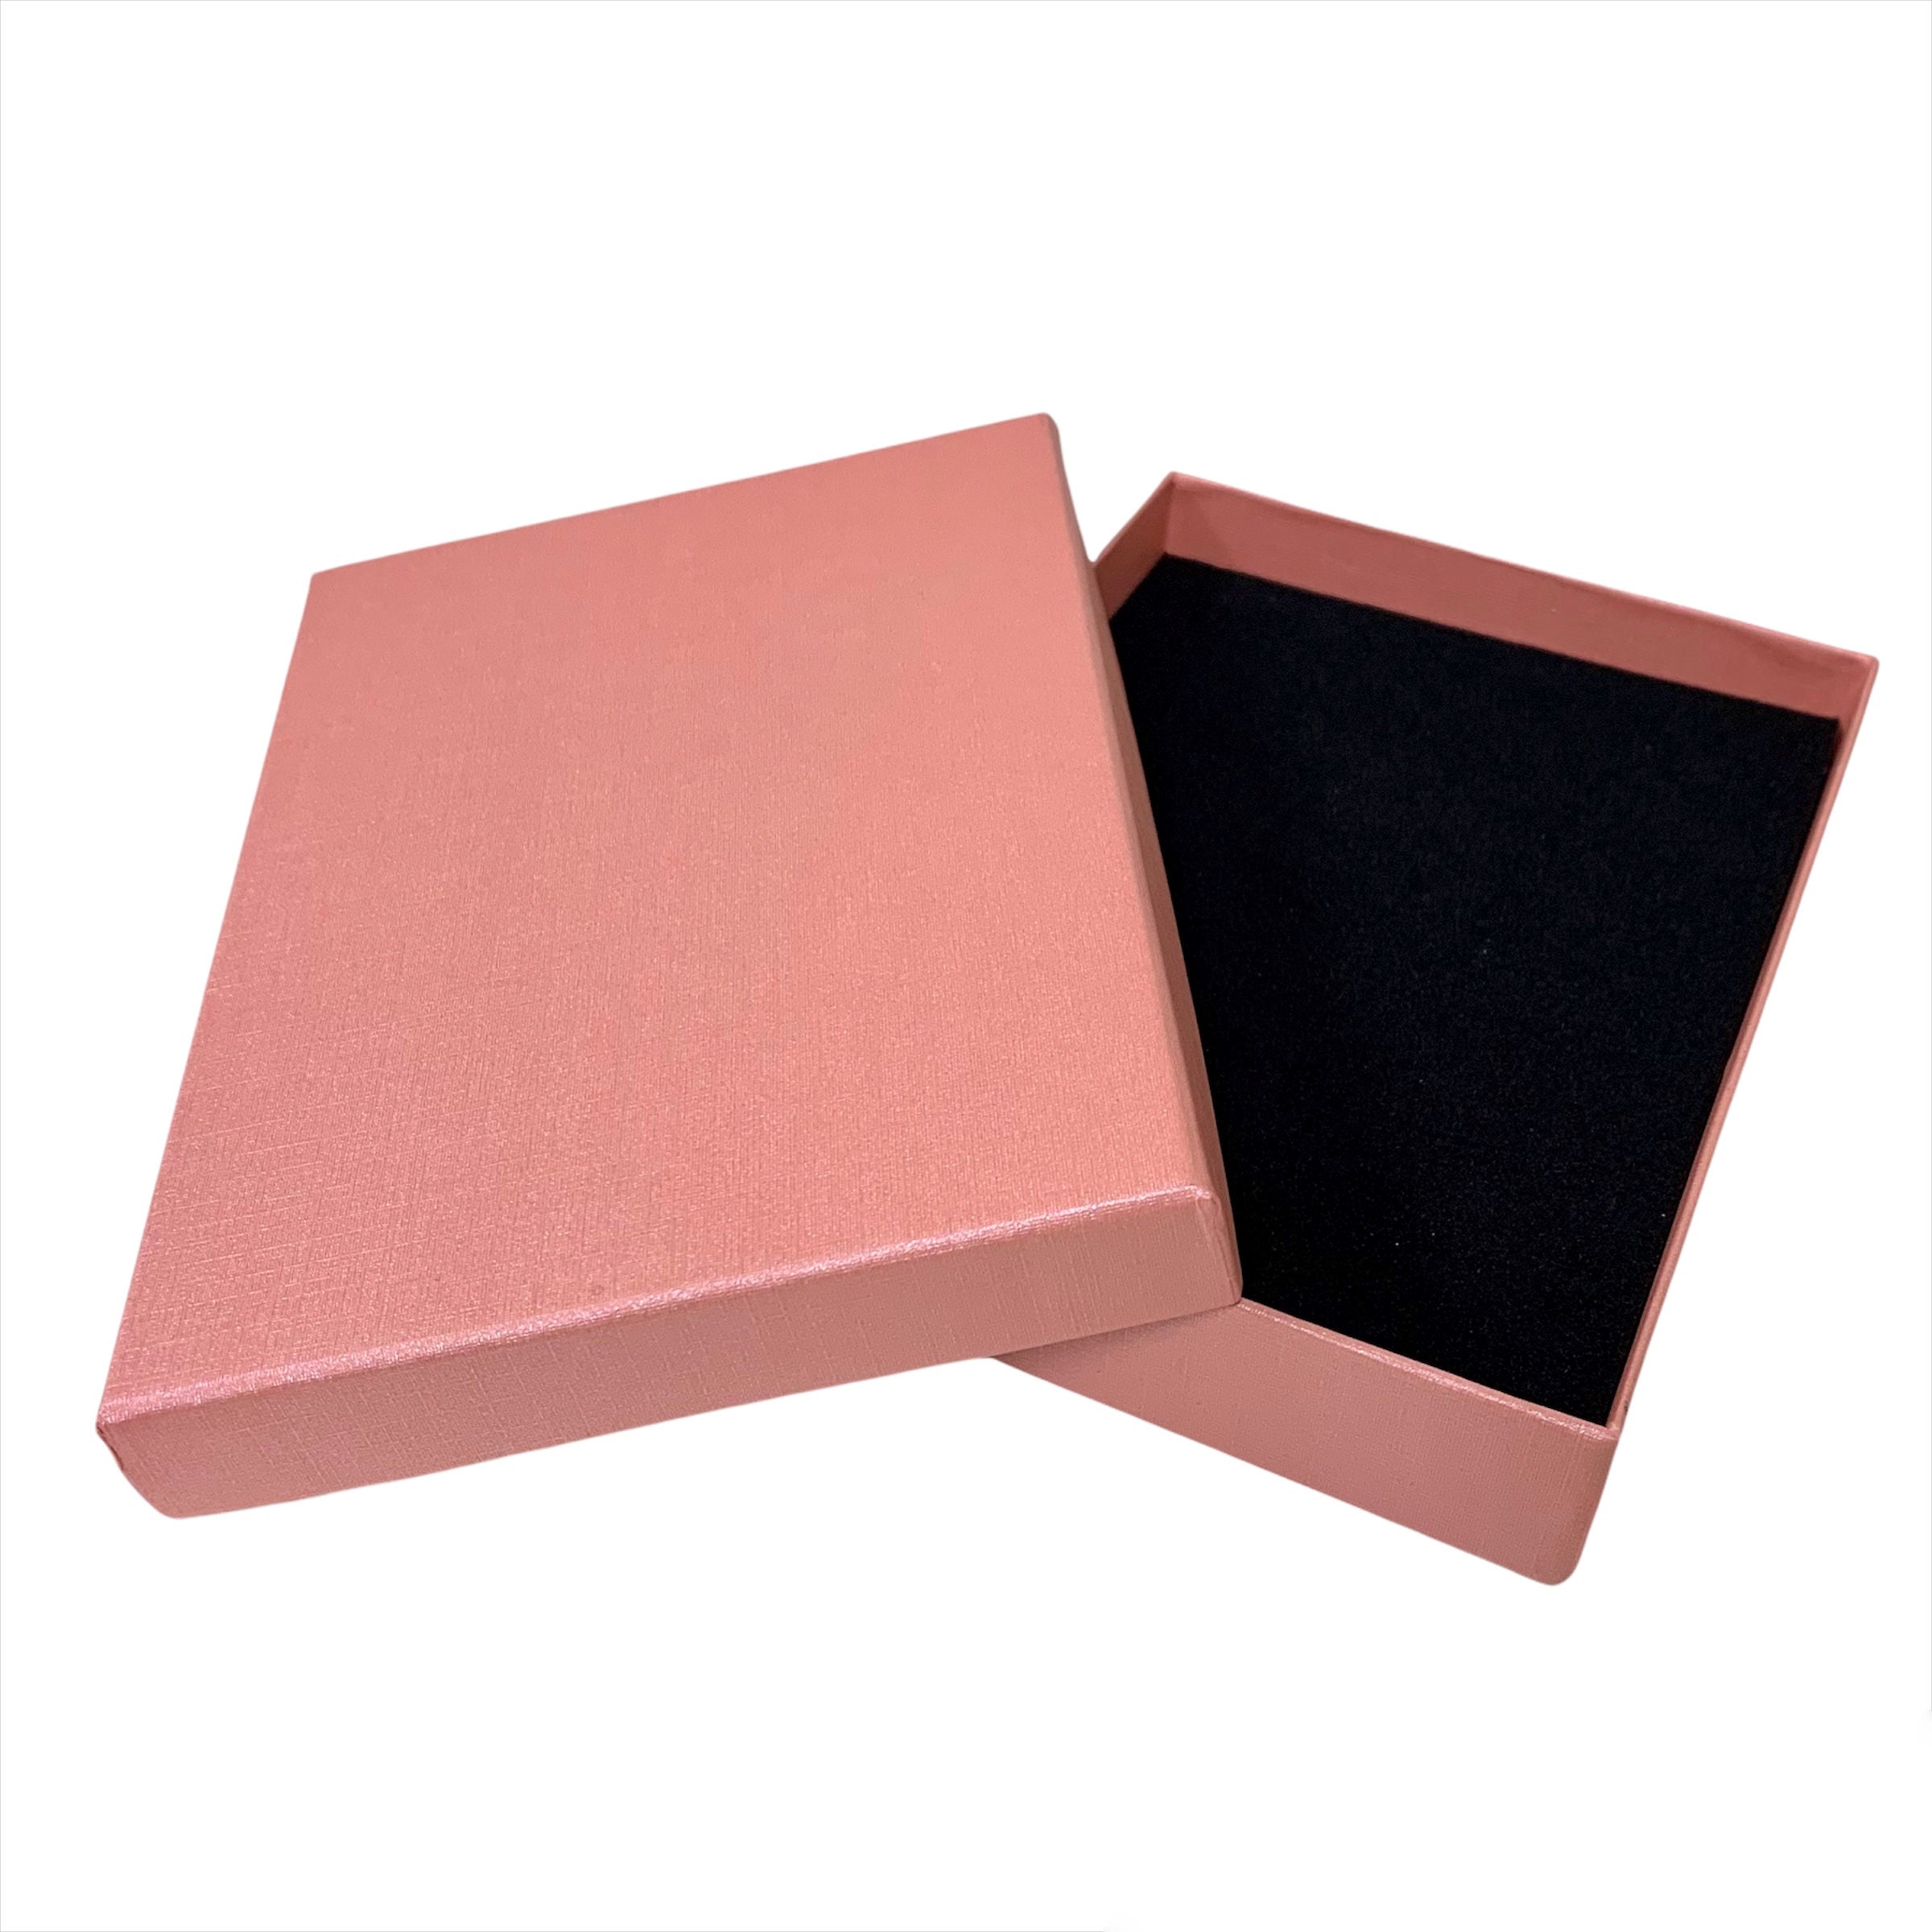 Pink Diamond-textured Paper Cardboard Jewelry Gift Boxes With Foam Insert